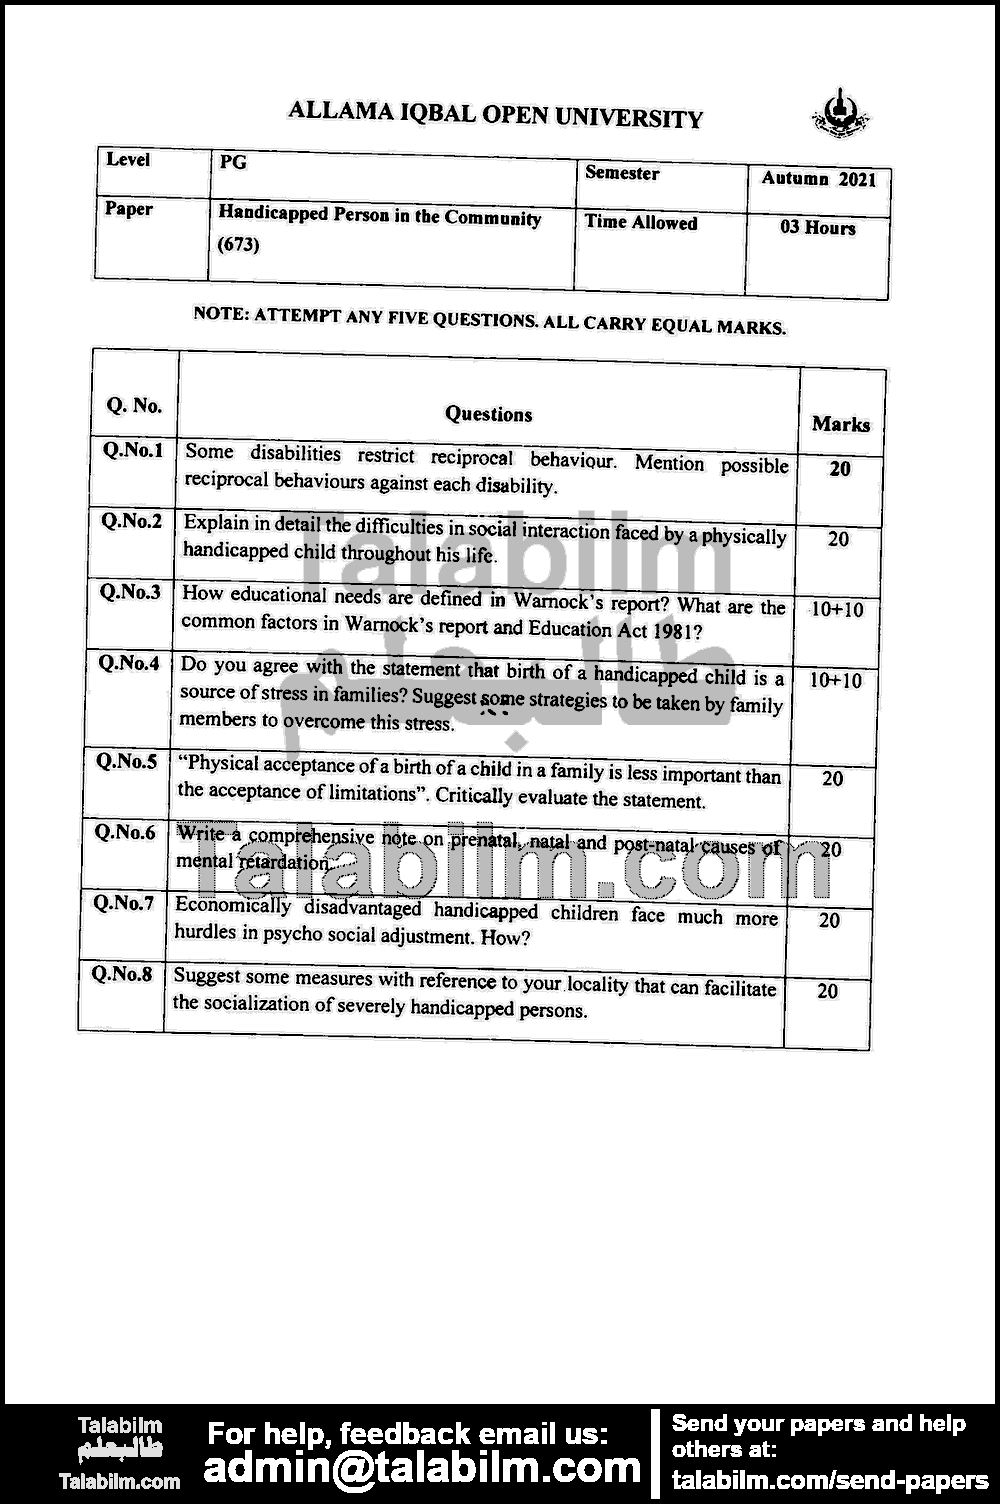 Handicapped Person in the Community 673 past paper for Autumn 2021